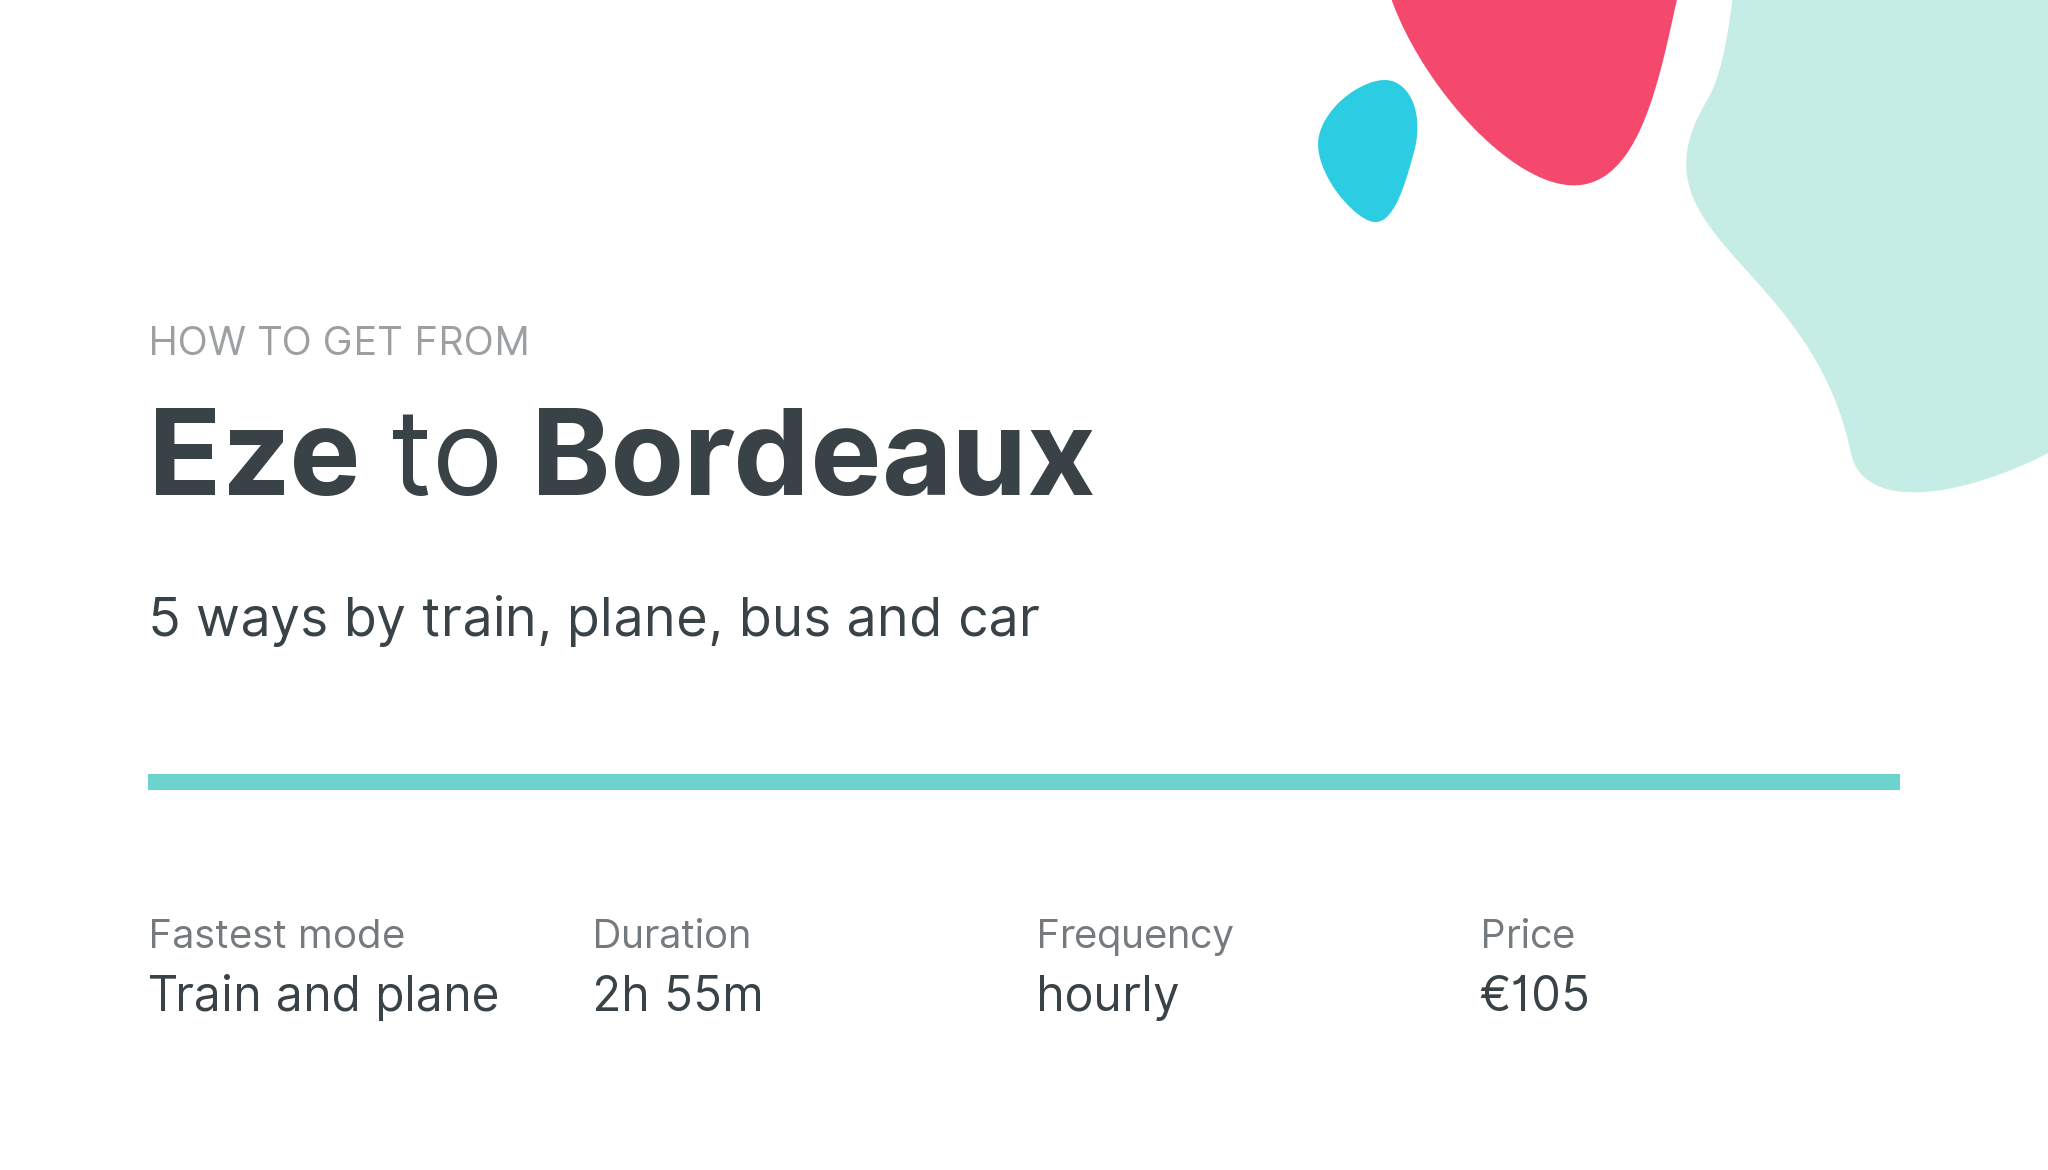 How do I get from Eze to Bordeaux